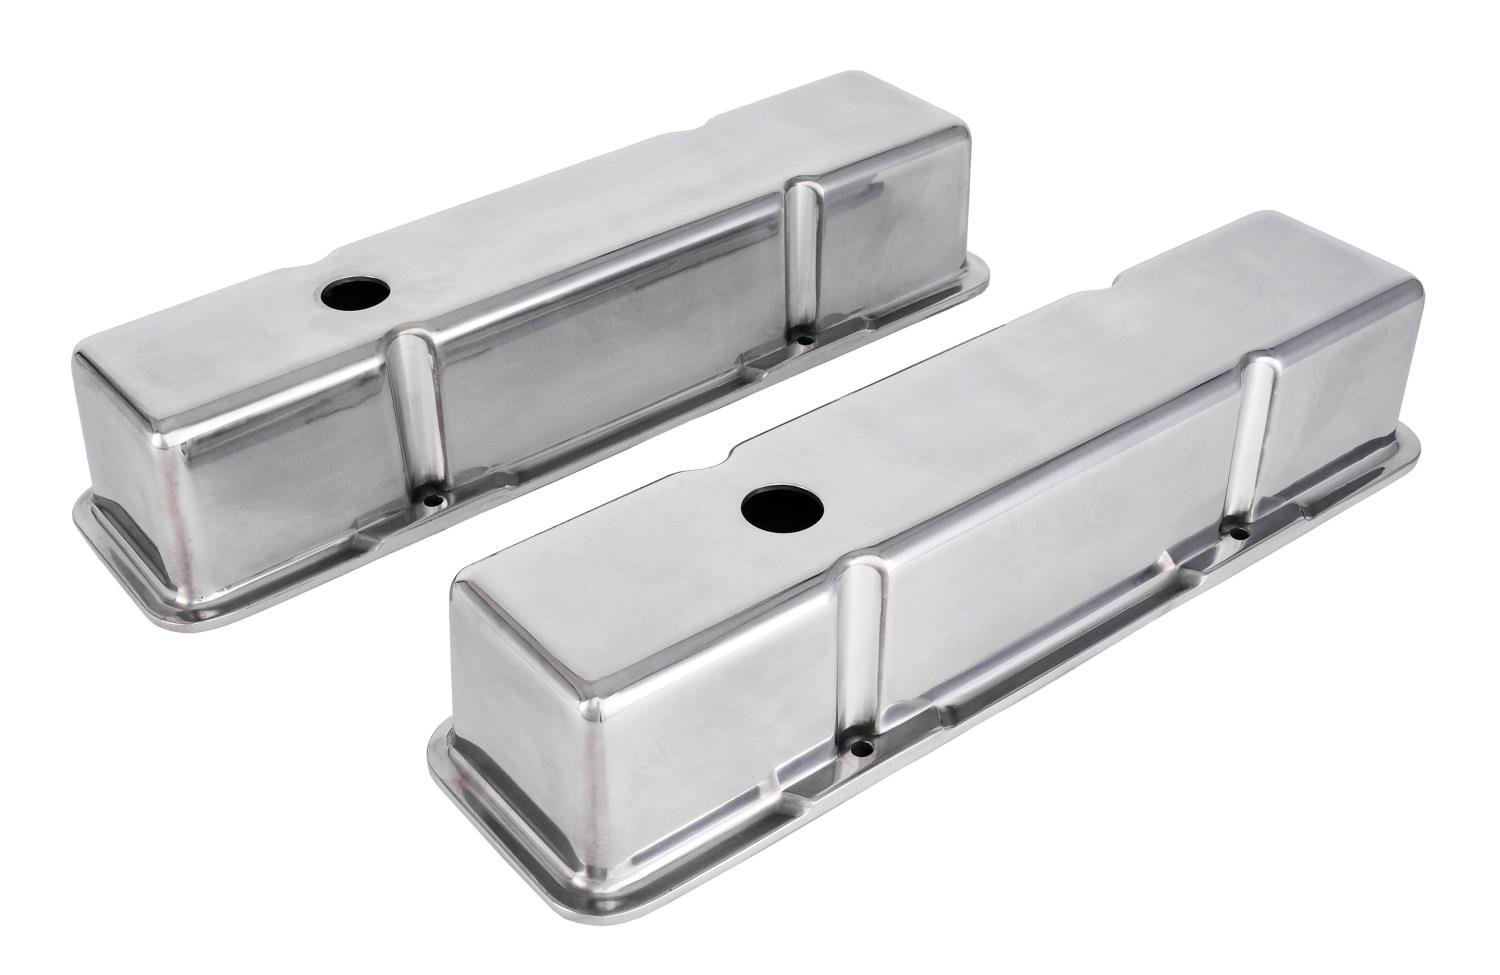 Polished Cast Aluminum Smooth Valve Covers for Small Block Chevy [Tall Design]